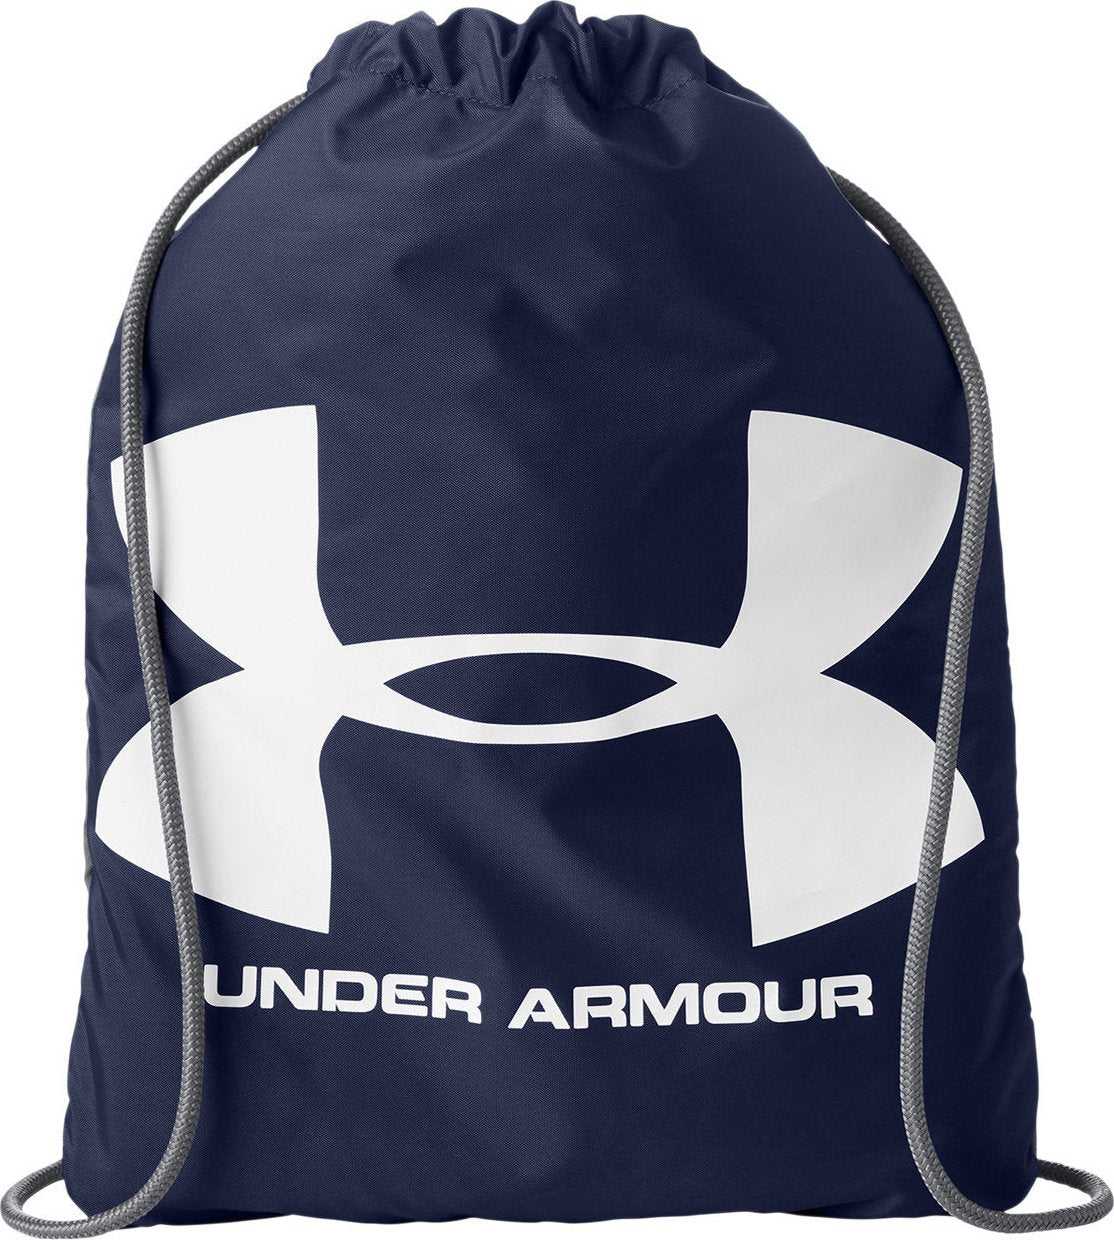 Under Armour 1240539 Ozsee Sackpack - Midnight Navy White